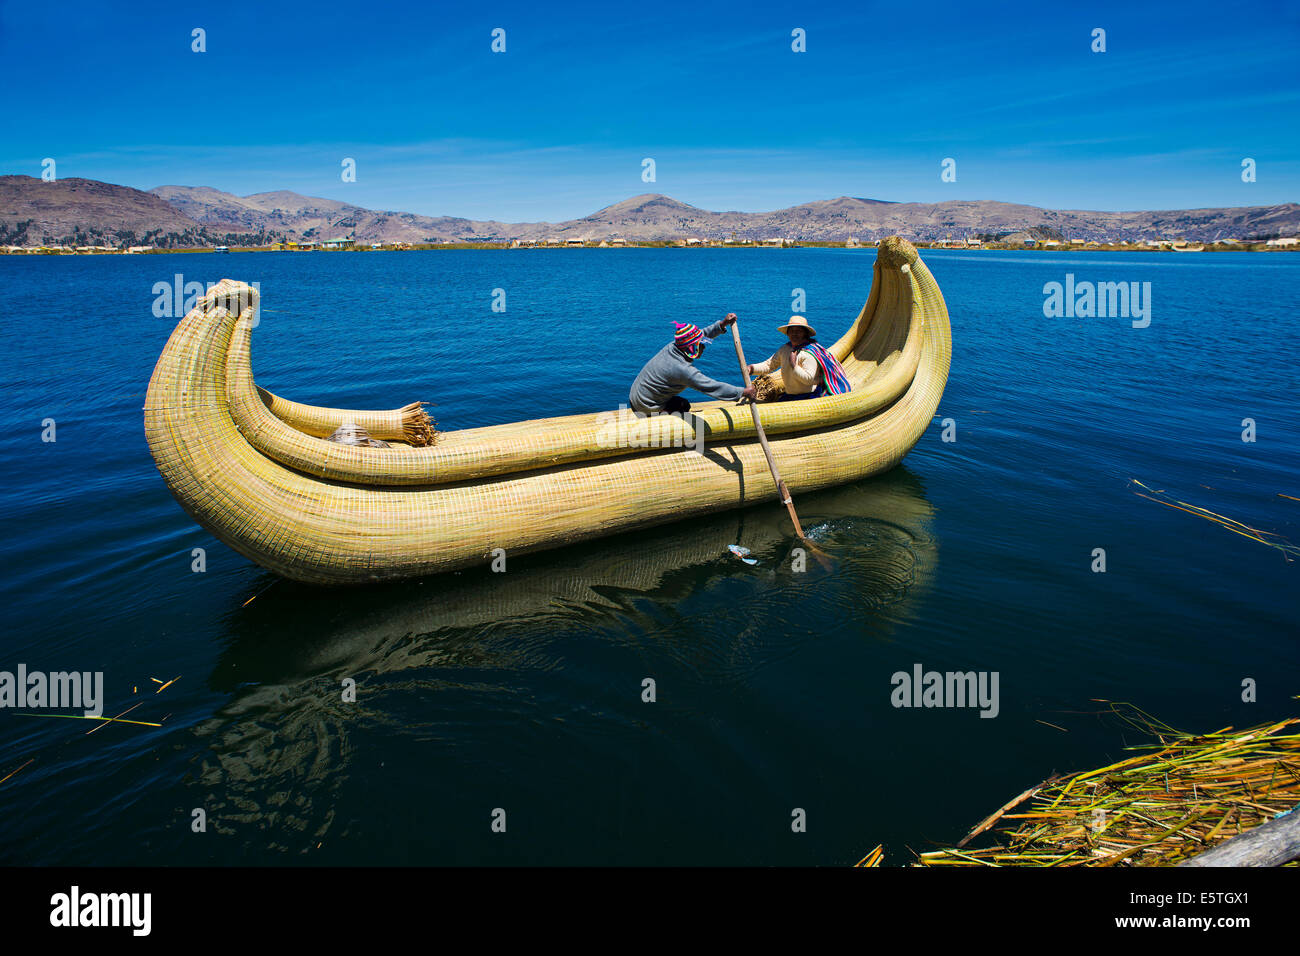 Two local people rowing a traditional boat made of totora reeds on Lake Titicaca, Southern Peru, Peru Stock Photo